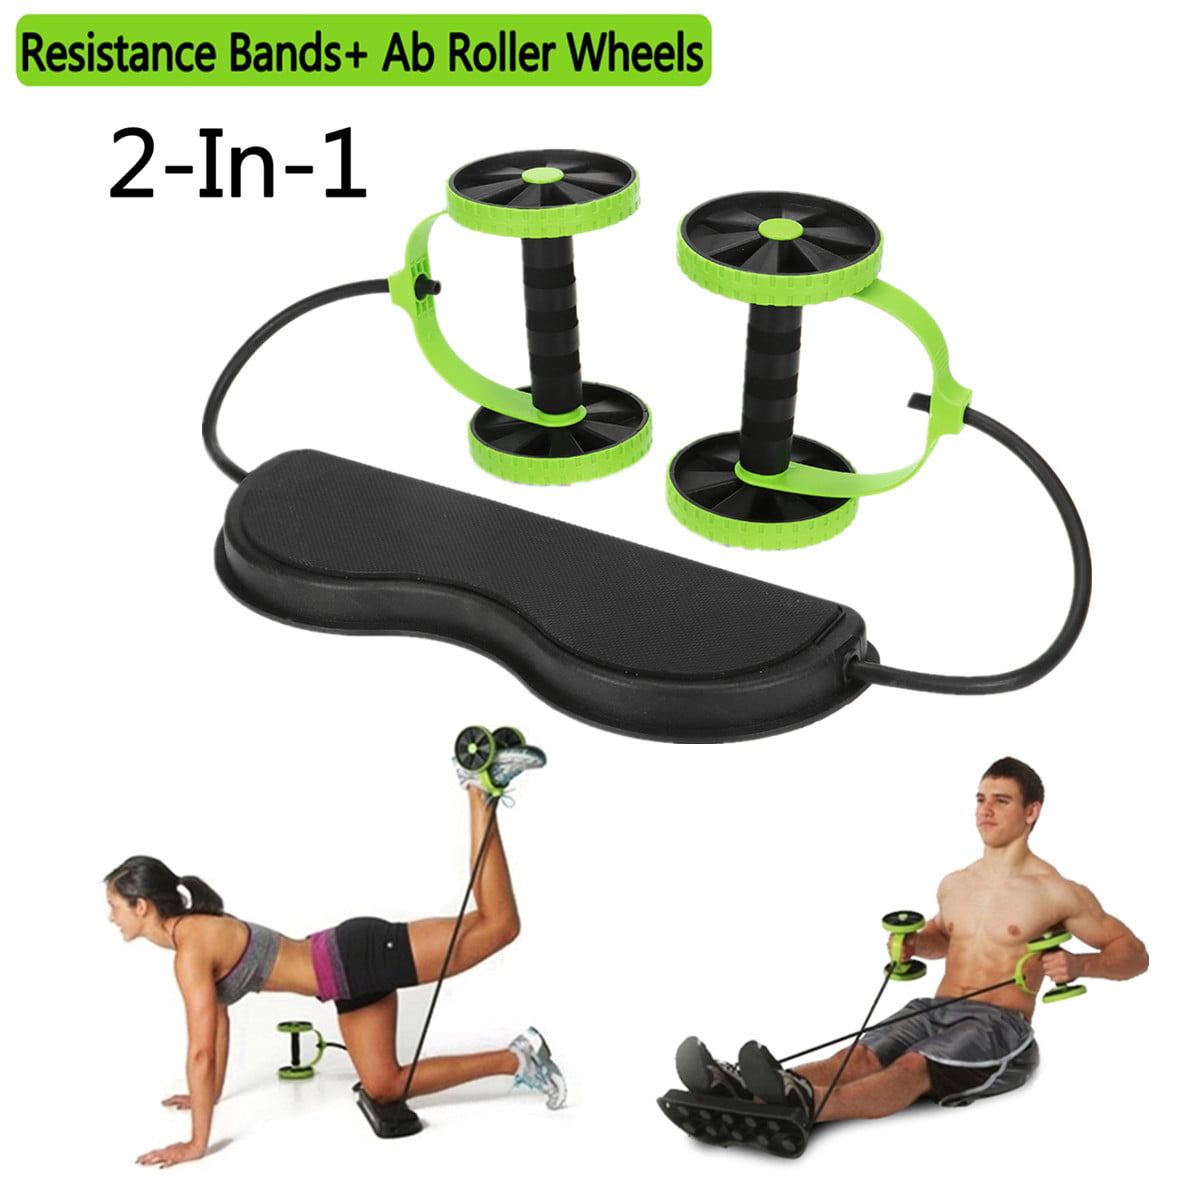 Abdominal Trainers AB Roller Multifunctional Exercise Equipment Ab Wheel Double Roller with Resistance Bands/Knee mat Waist Slimming Trainer at Home Gym